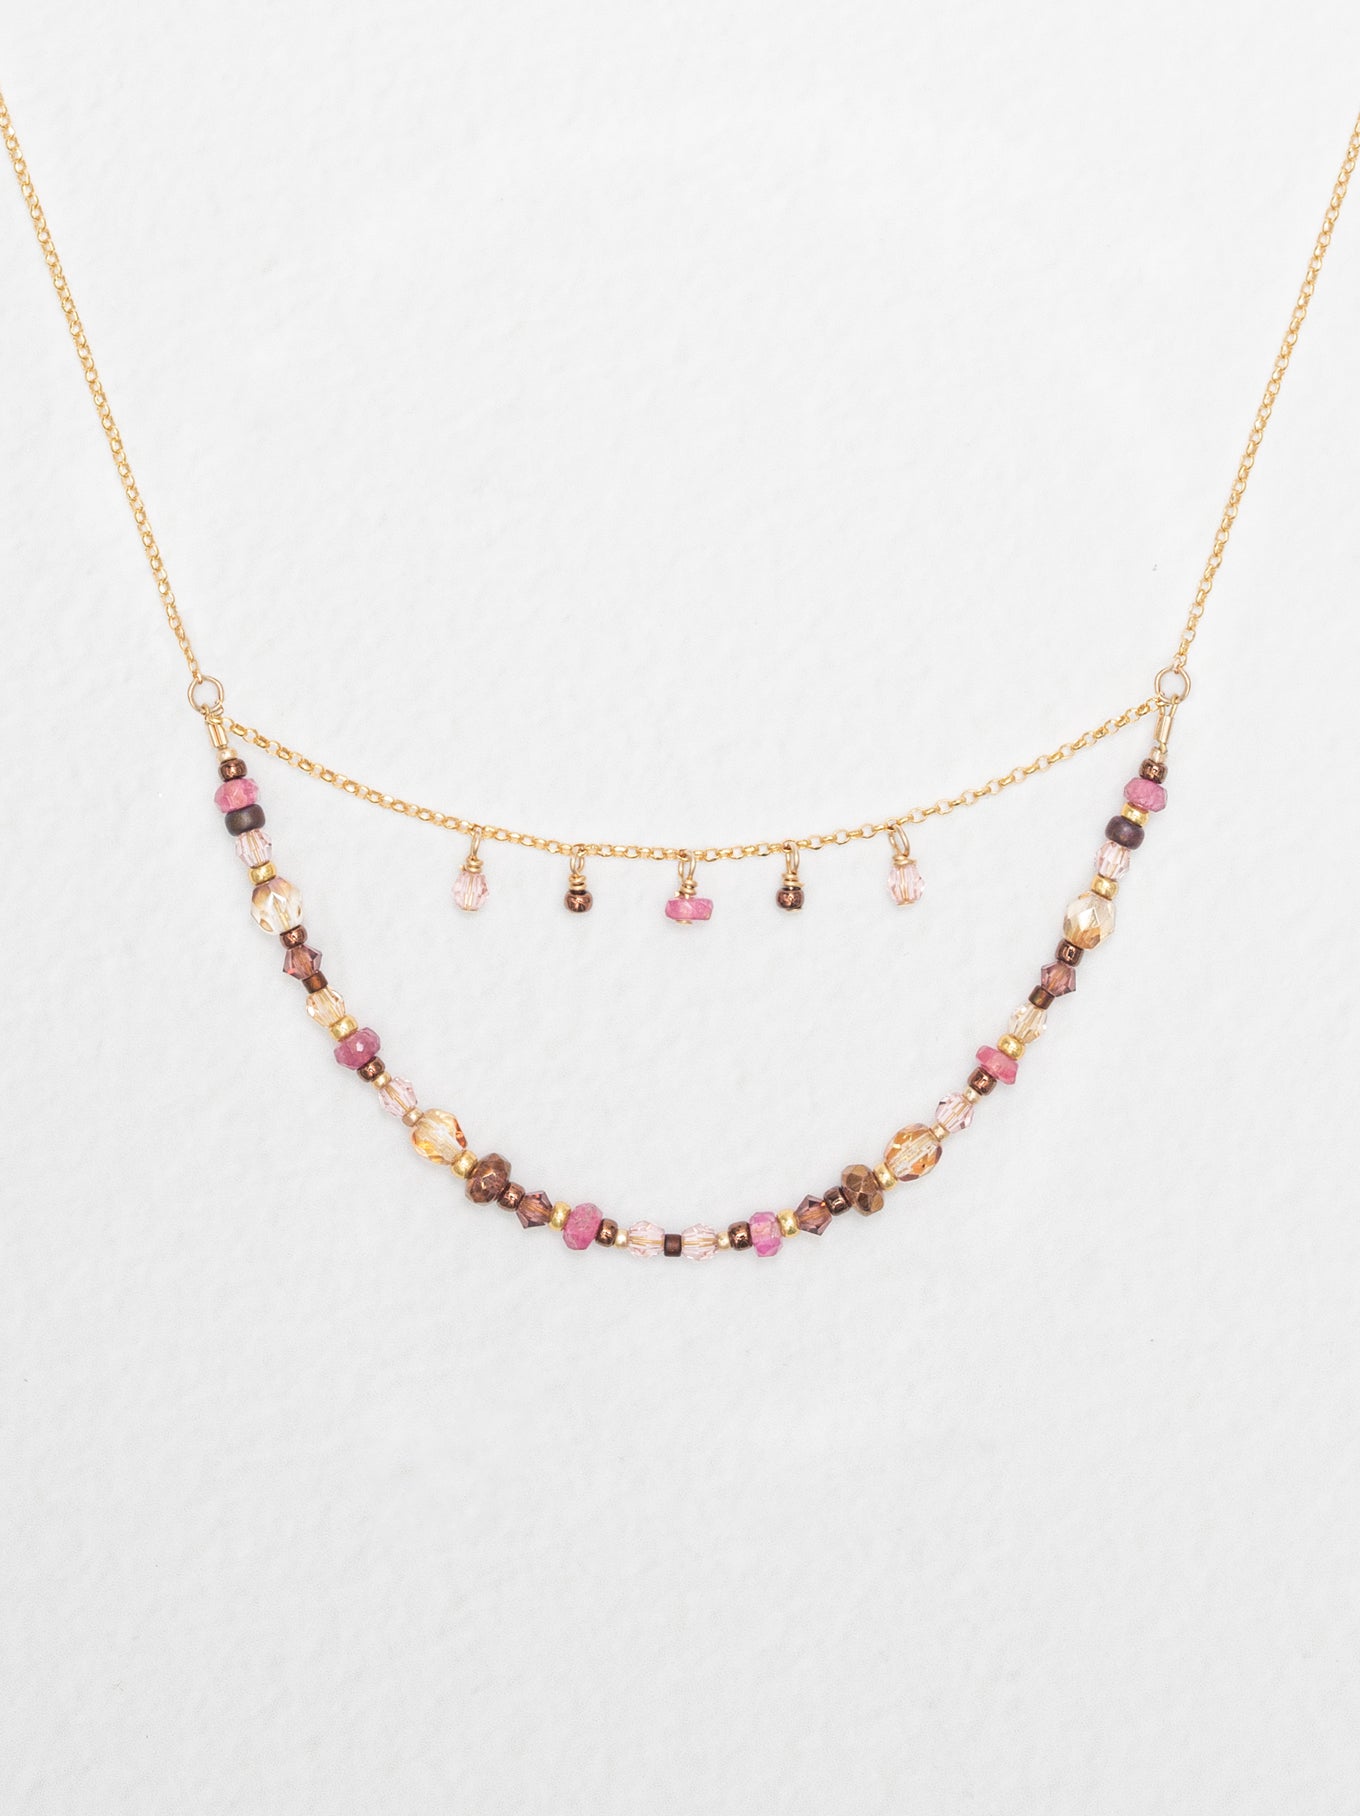 How To Layer Necklaces - Flutterby Jewellery